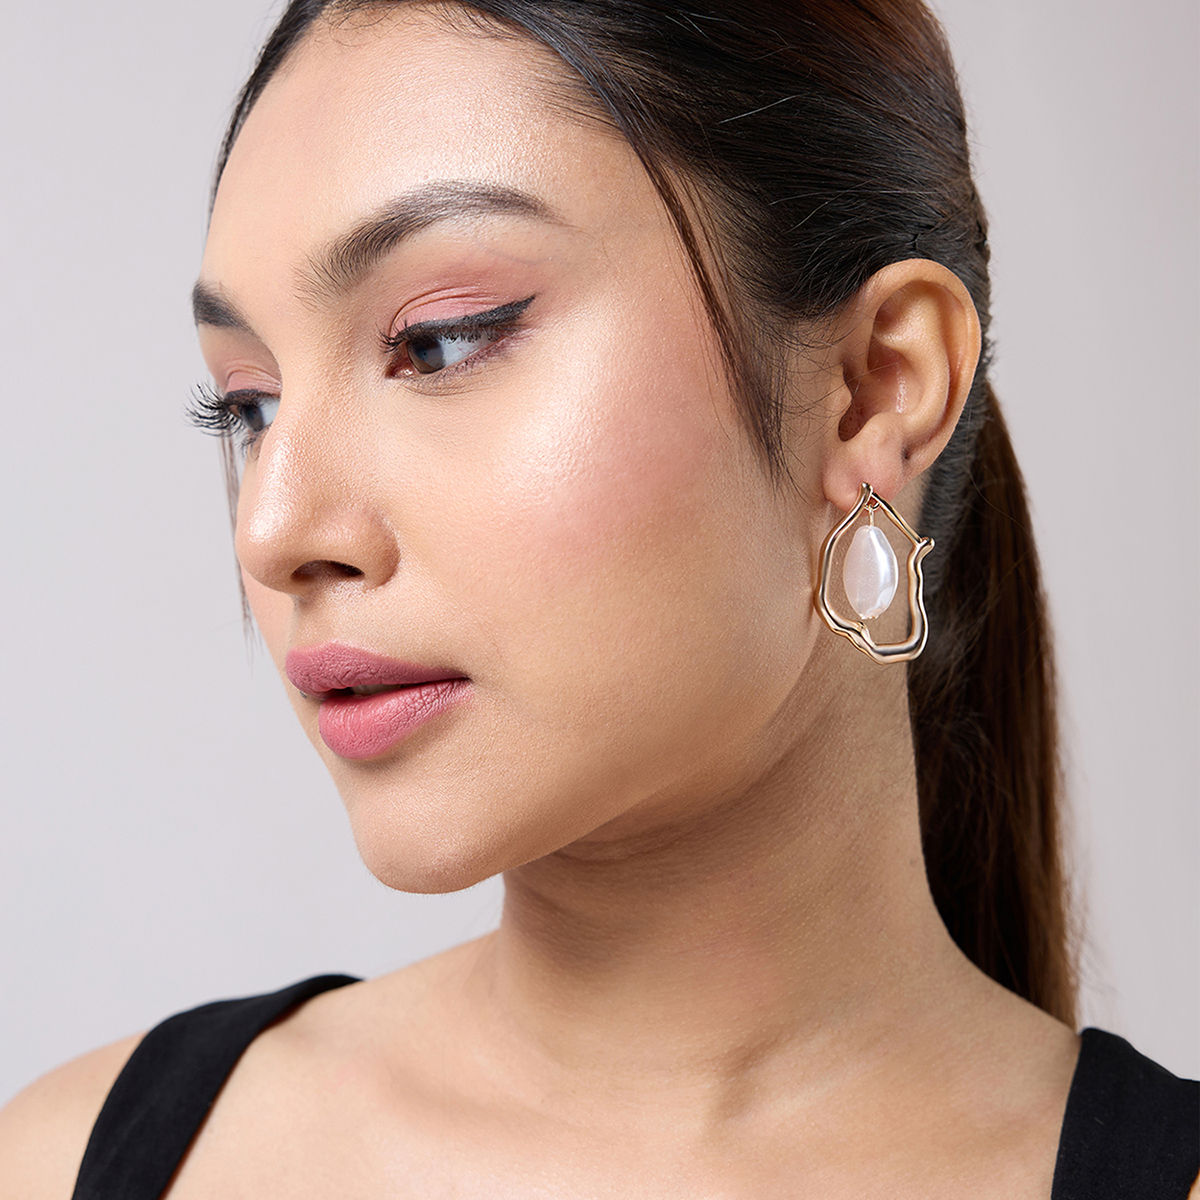 Twenty Dresses By Nykaa Fashion The Chains Go Around Earrings Buy Twenty  Dresses By Nykaa Fashion The Chains Go Around Earrings Online at Best Price  in India  Nykaa